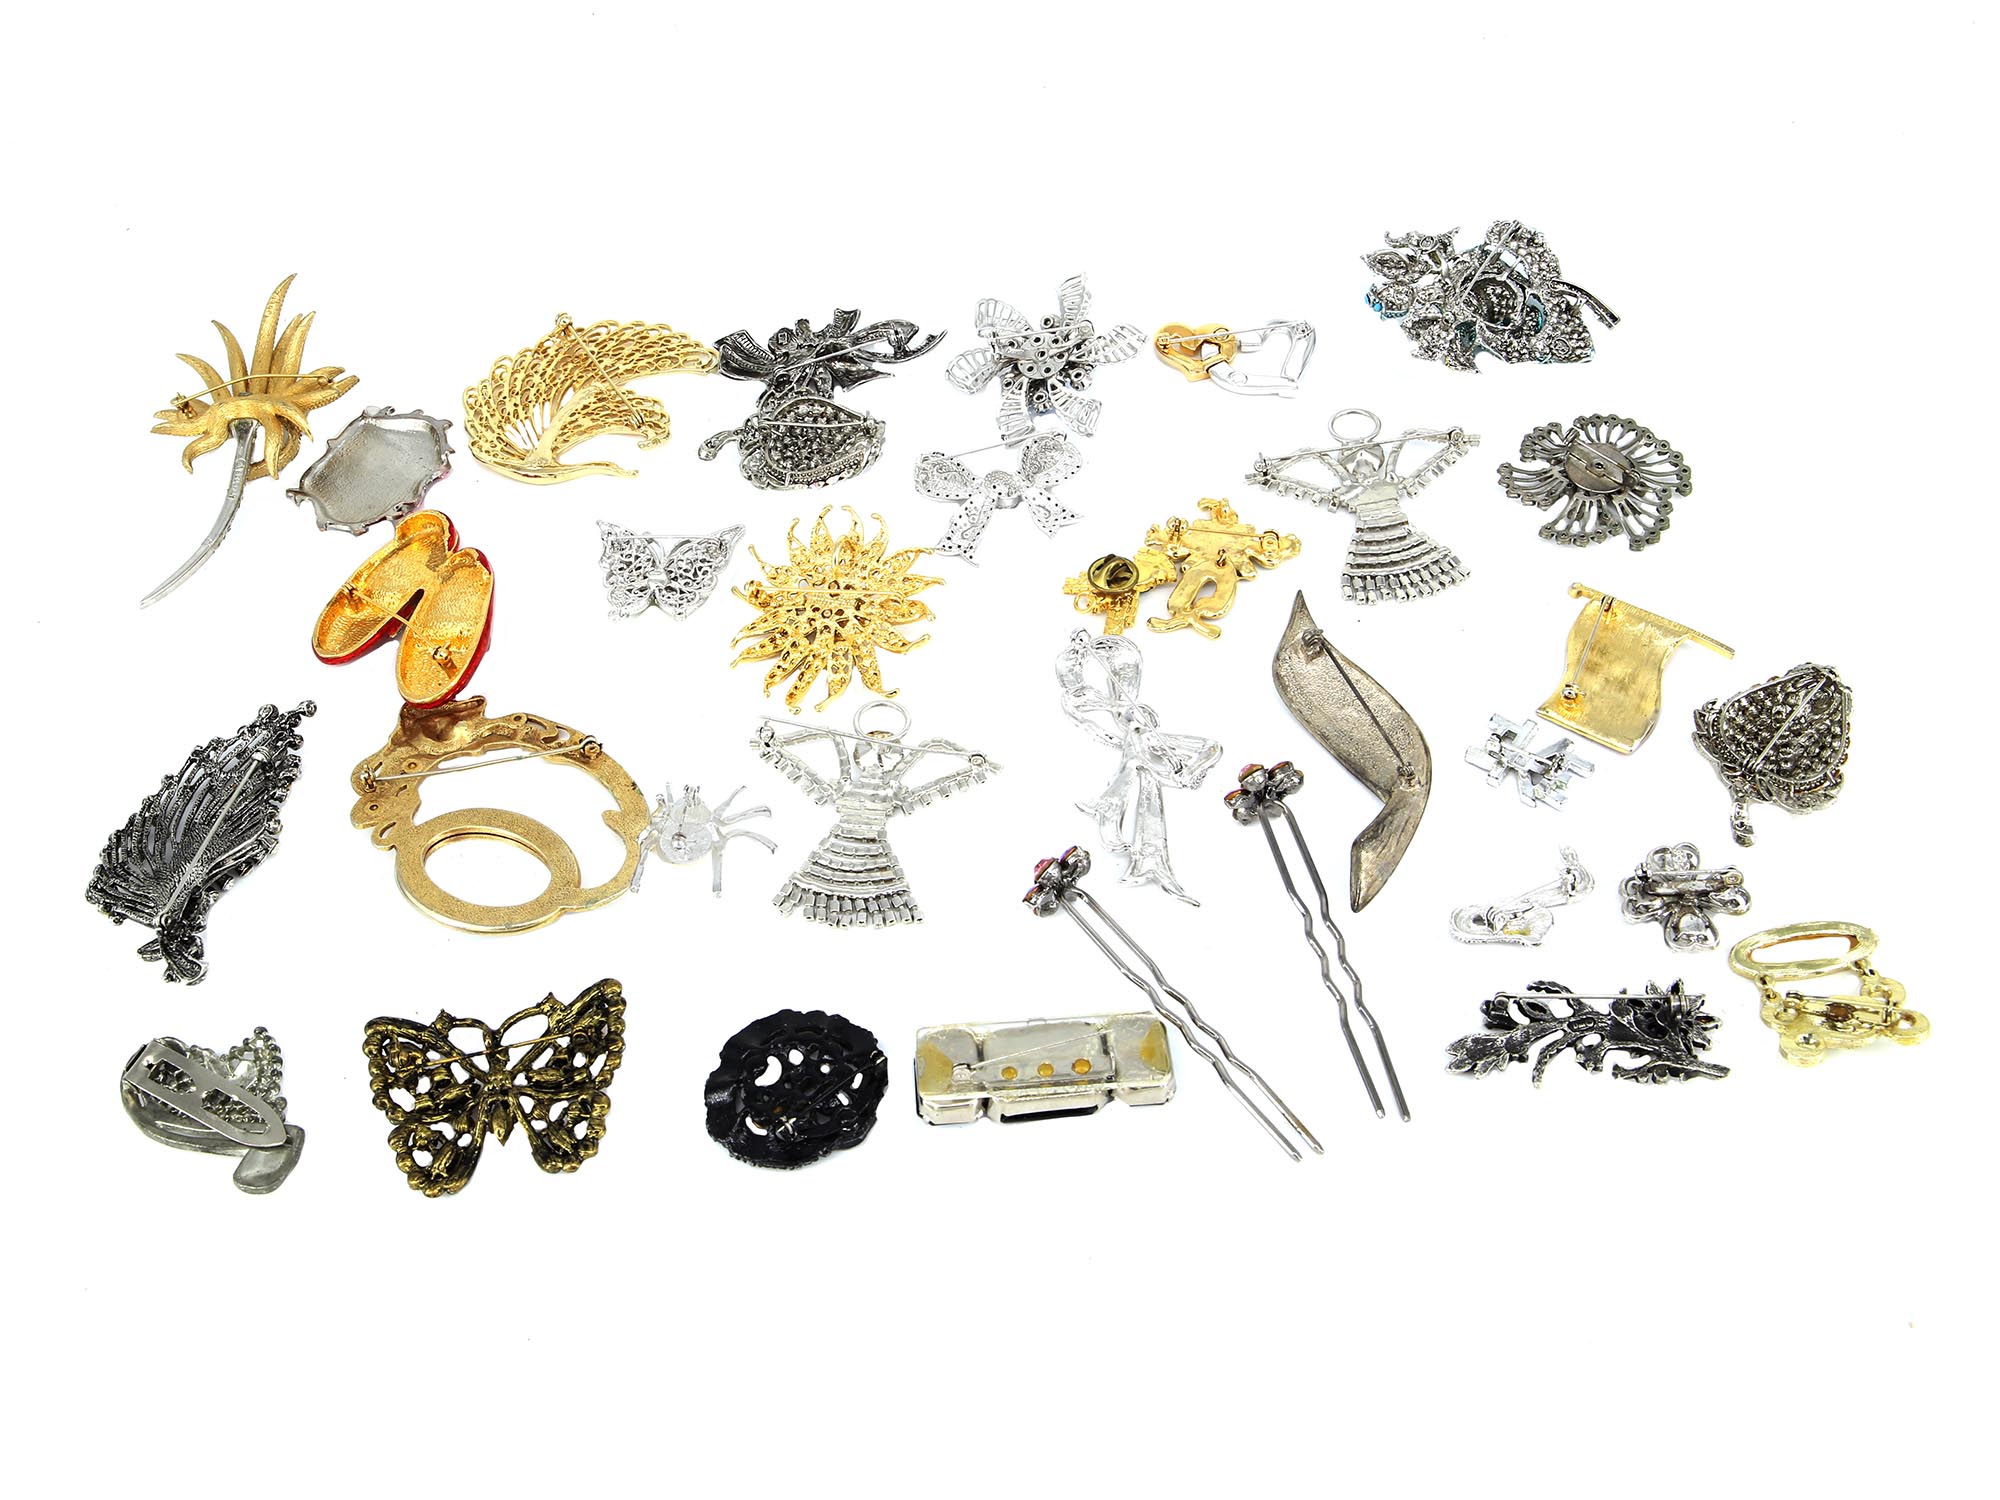 A LARGE COLLECTION OF COSTUME JEWELRY BROOCHES PIC-1